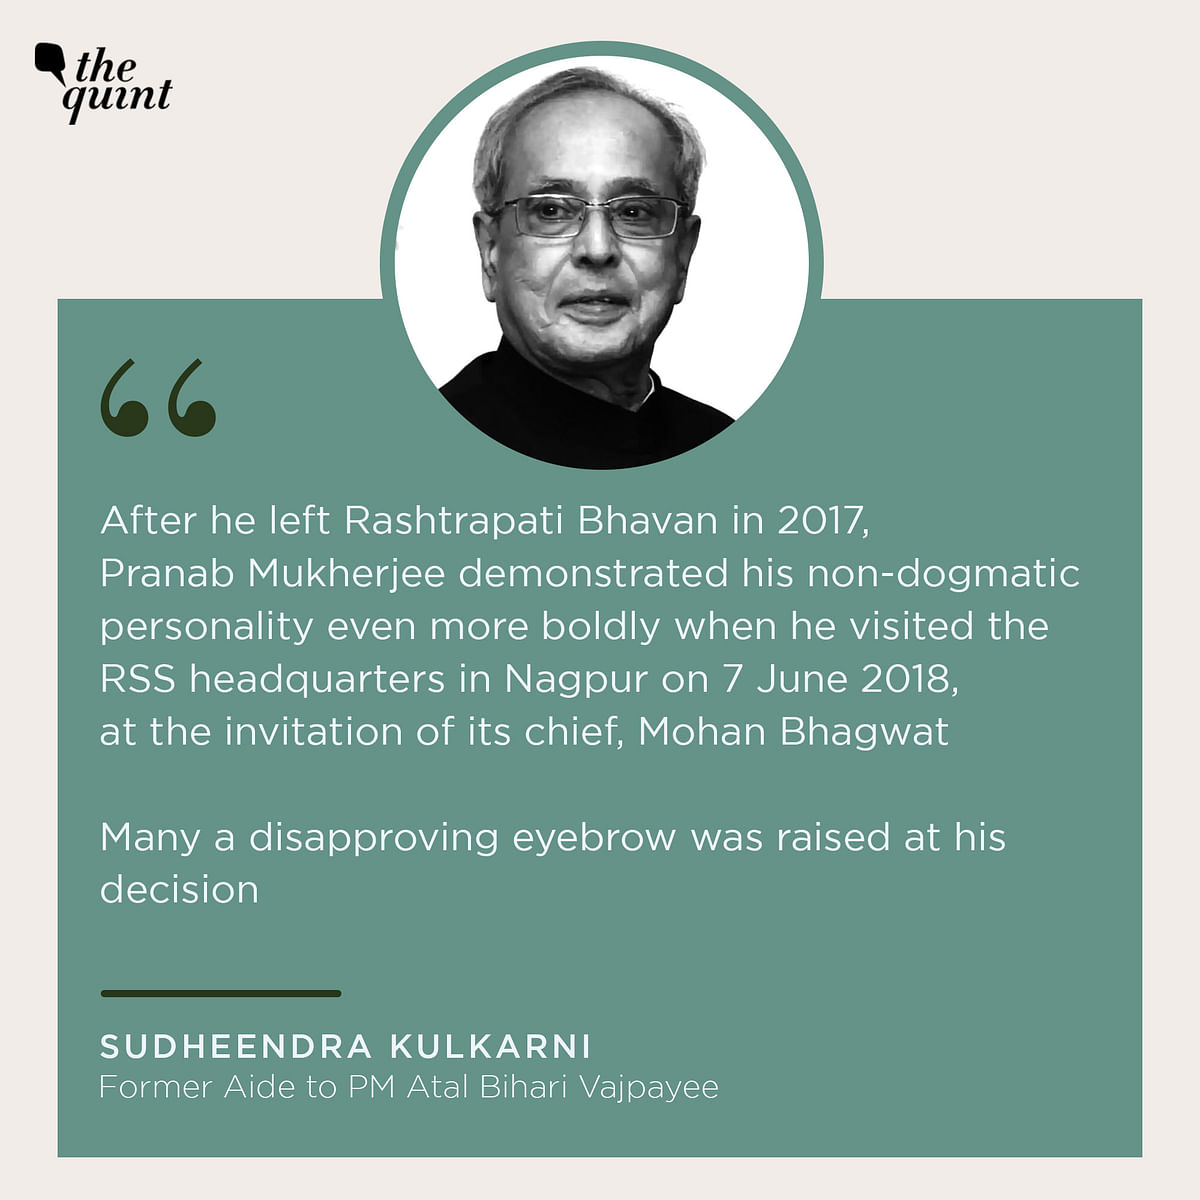 Pranab Mukherjee defended ‘secularism’ as one of the foundational pillars of Indian civilisation and Constitution.